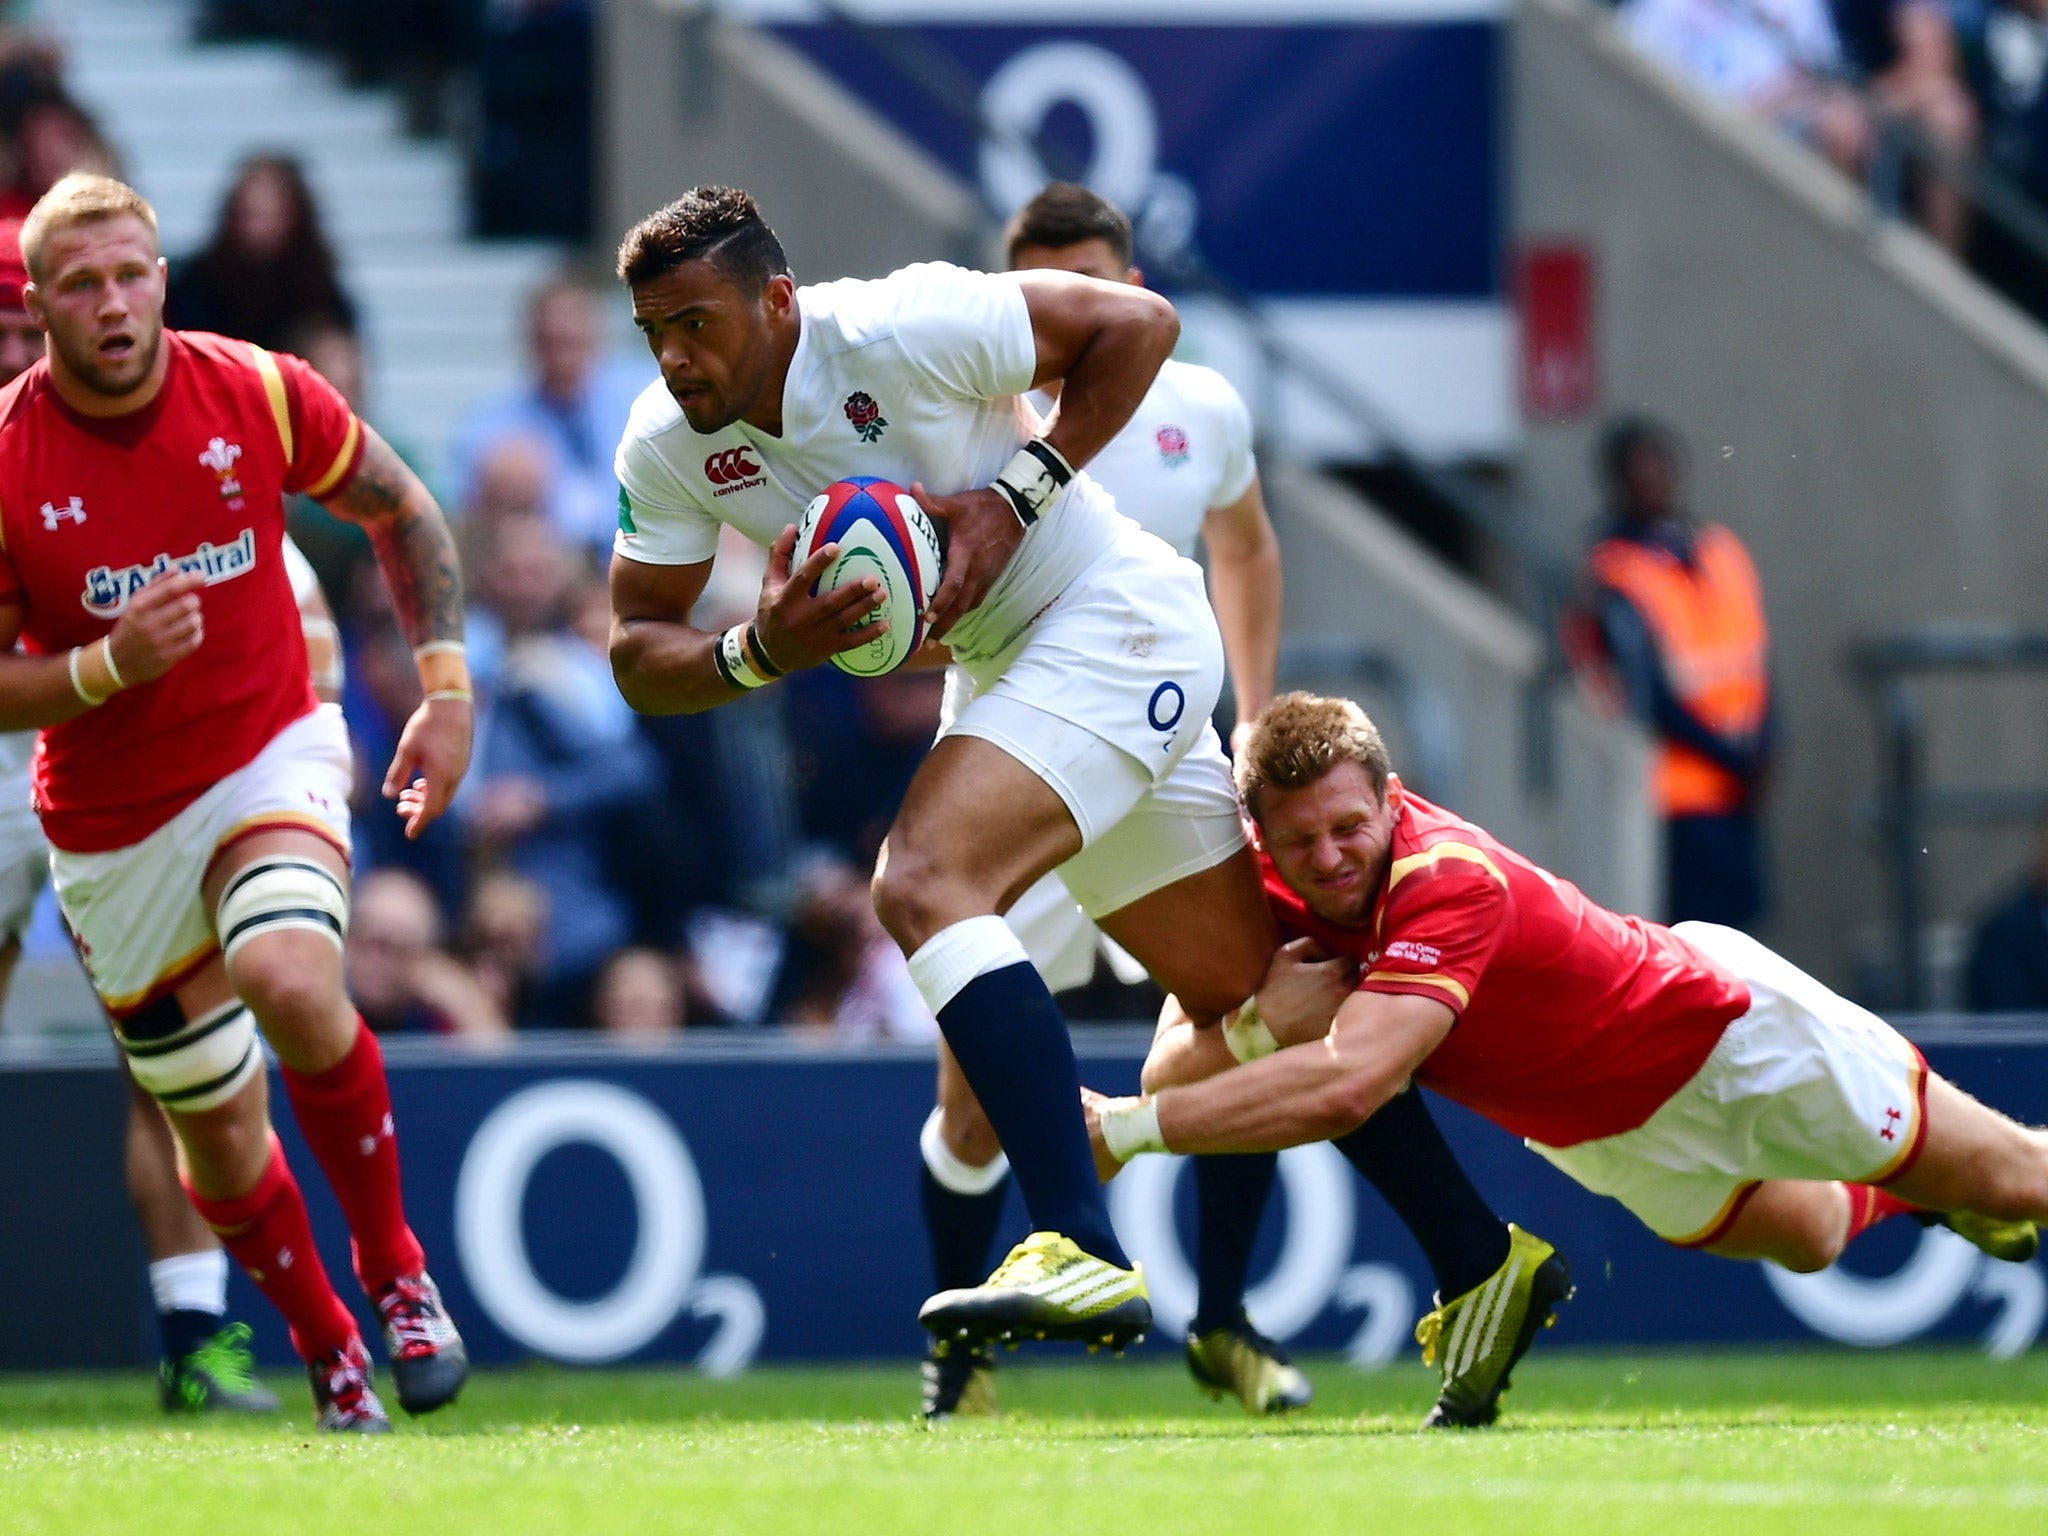 Luther Burrell scored England's first try against Wales